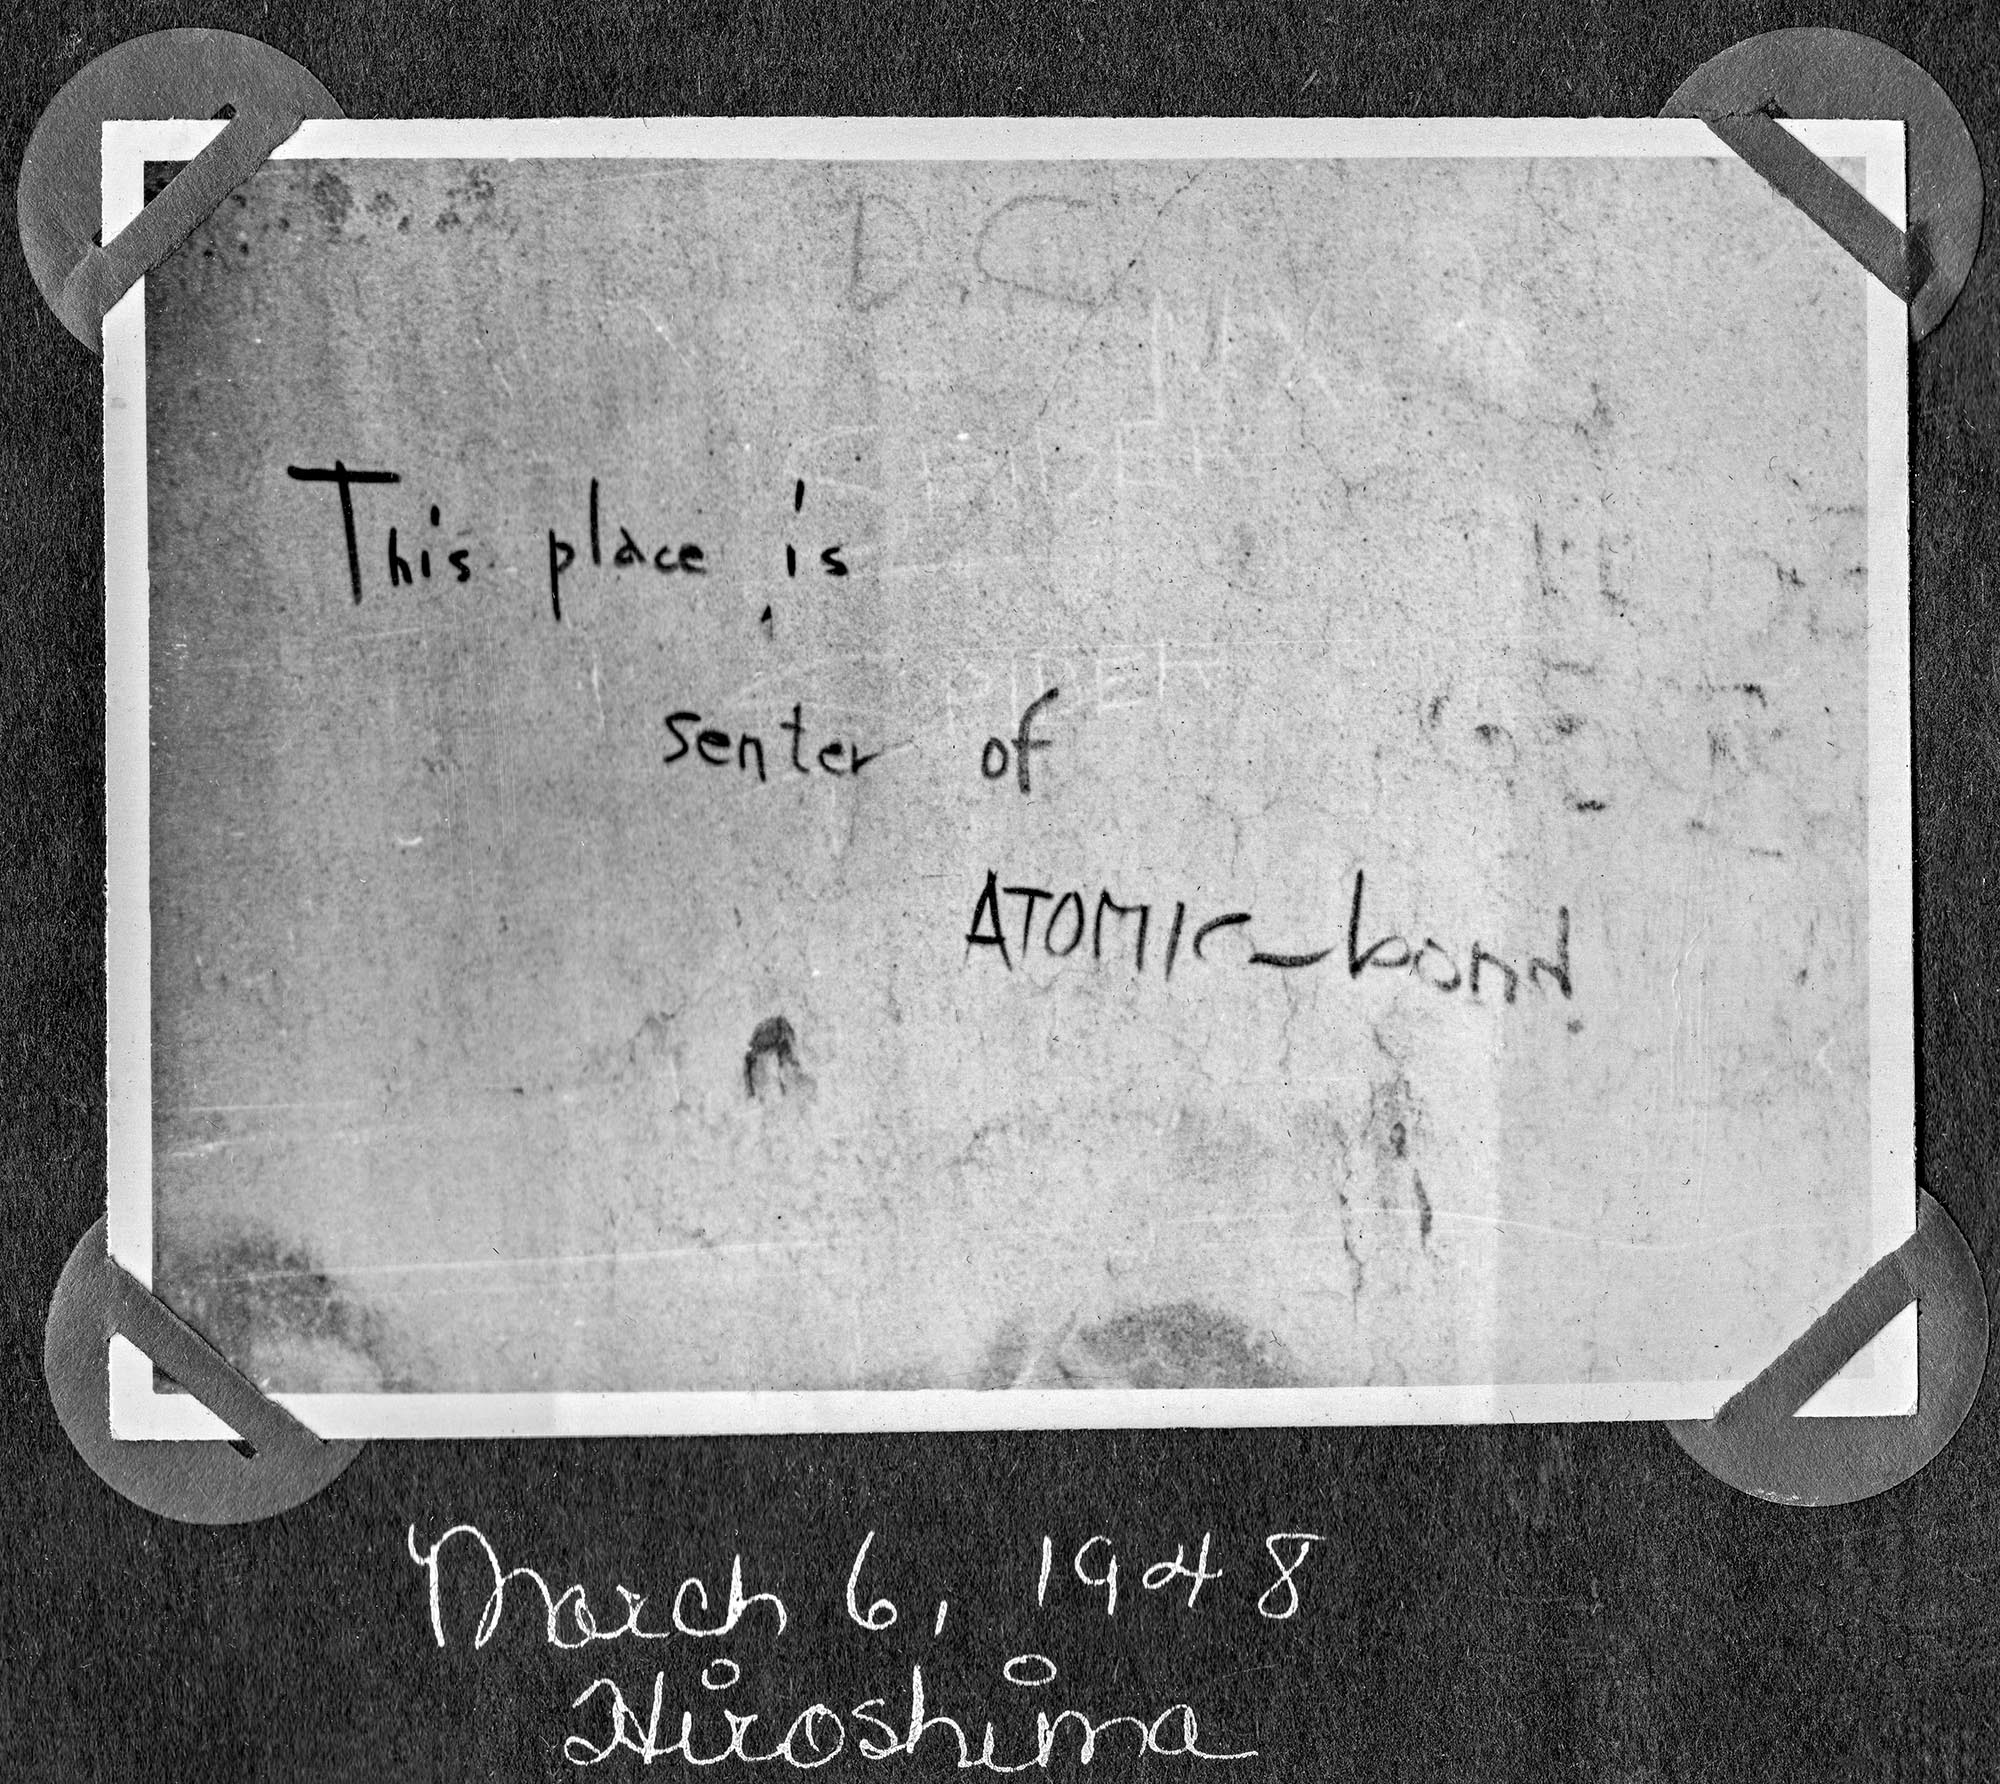 "This place is senter of ATOMIC-bond" graffiti scrawled on the side of the Genbaku Dome. The Genbaku Dome was the only building left standing near the hypocenter of the atomic bomb’s blast. Hiroshima, occupied Japan, March 6, 1948.

Captain Clarence V. Ward was sent with the US Army to provide ophthalmology care to war-refugee Japanese children and adults as well as American Service personnel.

From a photo album titled "Pictures from Japan and Elsewhere." Occupied Japan era, Captain Clarence V. Ward, US Army from 1947-1949, 28th General Hospital, Osaka, Japan. Clarence lived in Peoria, Illinois (Feb. 13, 1922 - June 5, 2009).

Ward served in the US Army from 1947-1949, 28th General Hospital, Osaka, Japan attaining the rank of Captain. He graduated from St. Bernard's Grade School in 1936; Spalding Institute in 1940; University of Notre Dame in 1944 where he earned his BS; and University of St. Louis School of Medicine in 1946. He served his internship at St. John's Hospital in St. Louis, MO from 1946-1947; Post Graduate at Northwestern University in Ophthalmology from 1949-1950; Residency at Hines Veterans Hospital in Hines, IL from 1950-1952 in Ophthalmology. He was an Ophthalmologist full time from 1952-1995 and part time from 1996-2004.